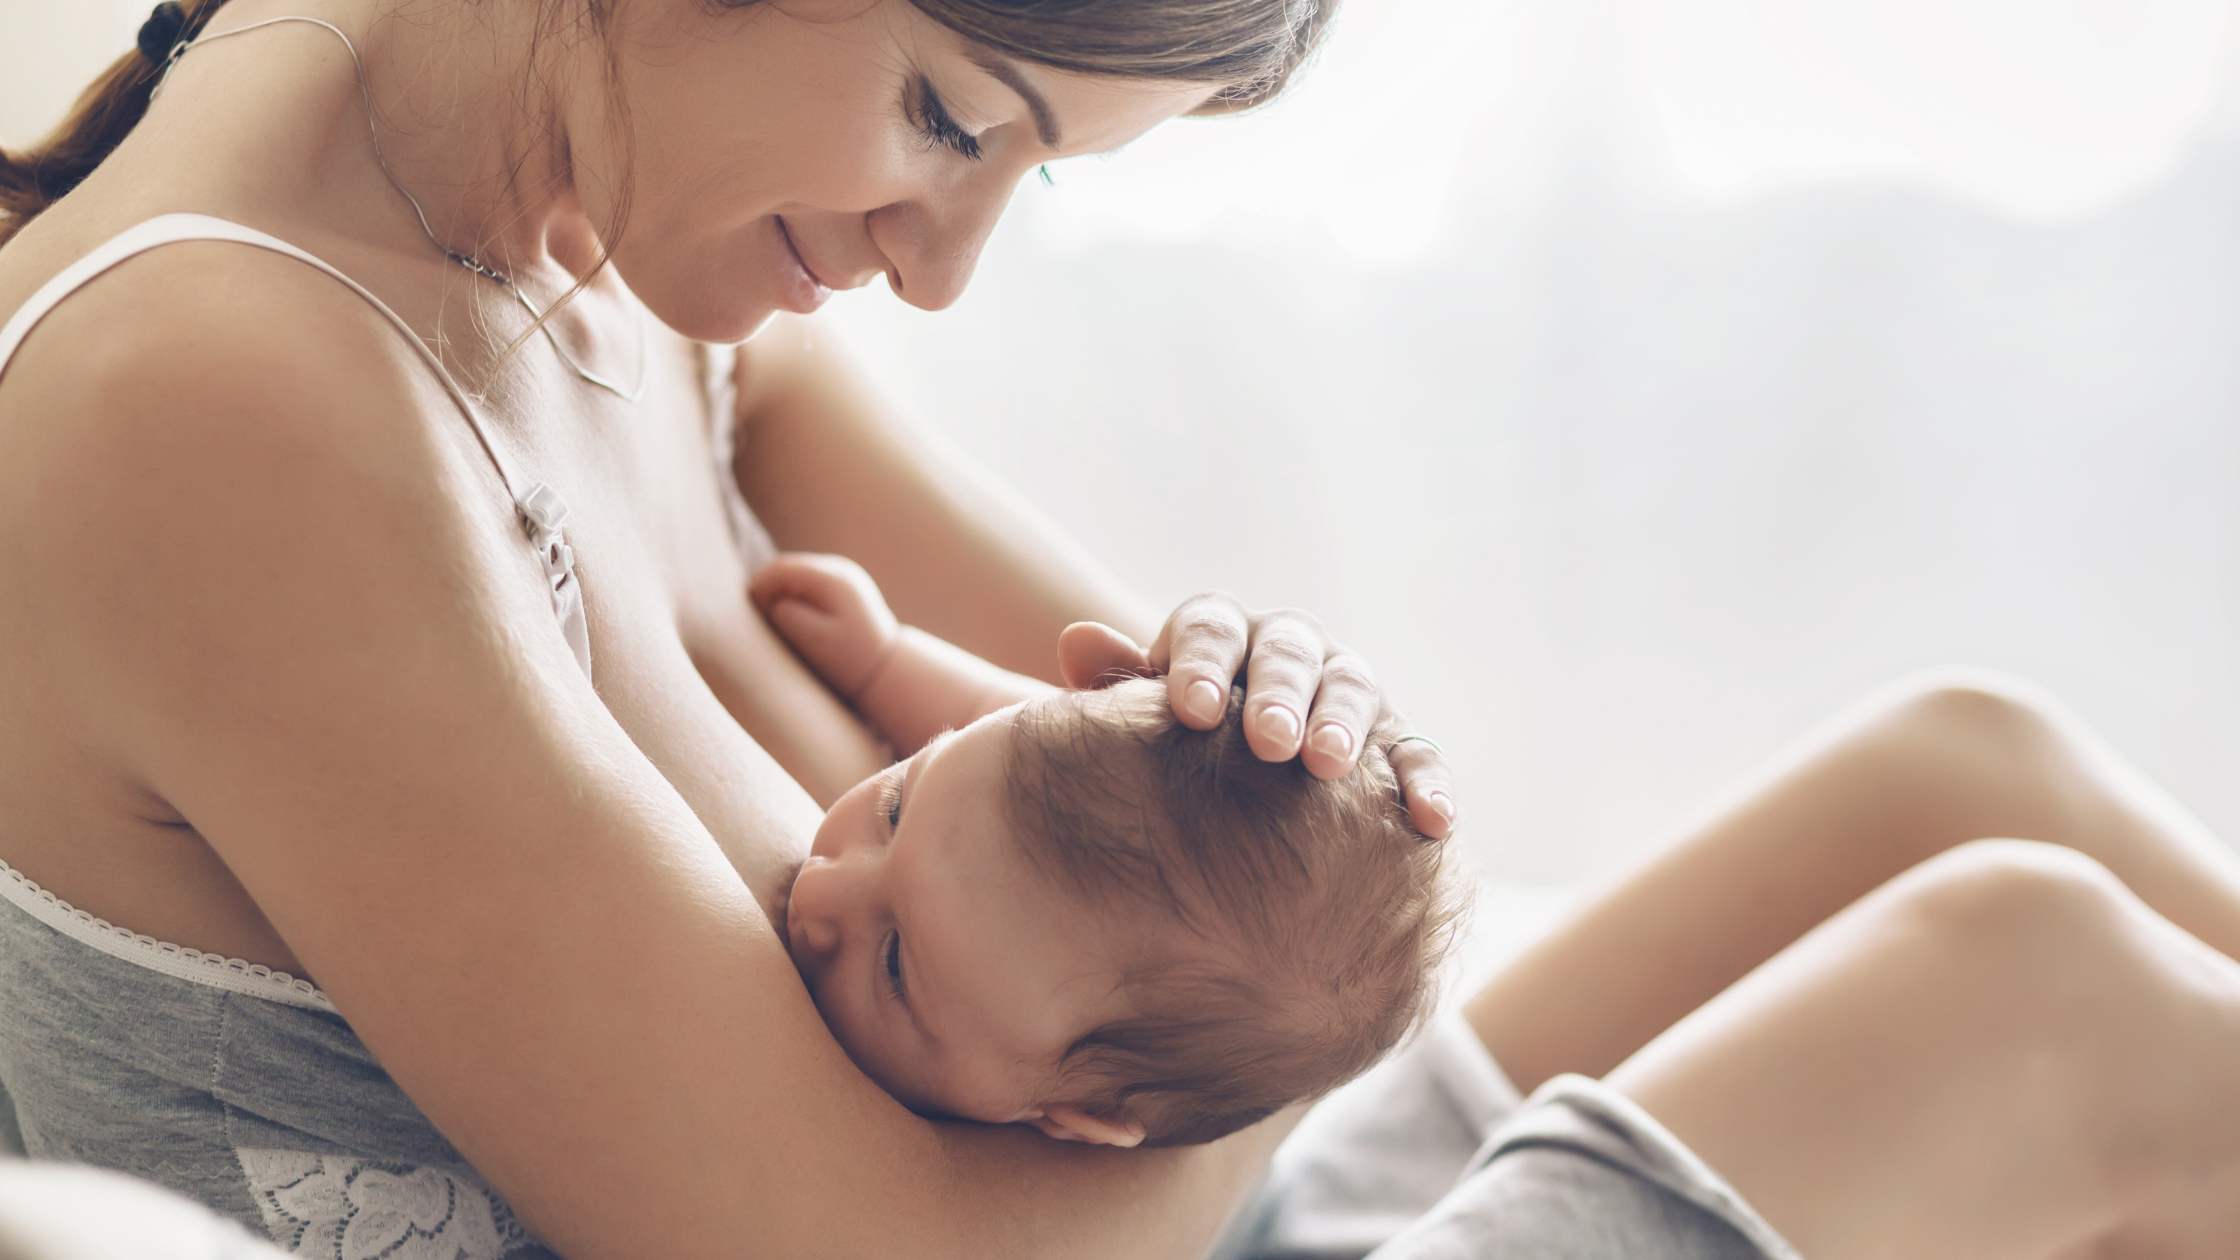 10 Foods to Limit Or Avoid While Breastfeeding